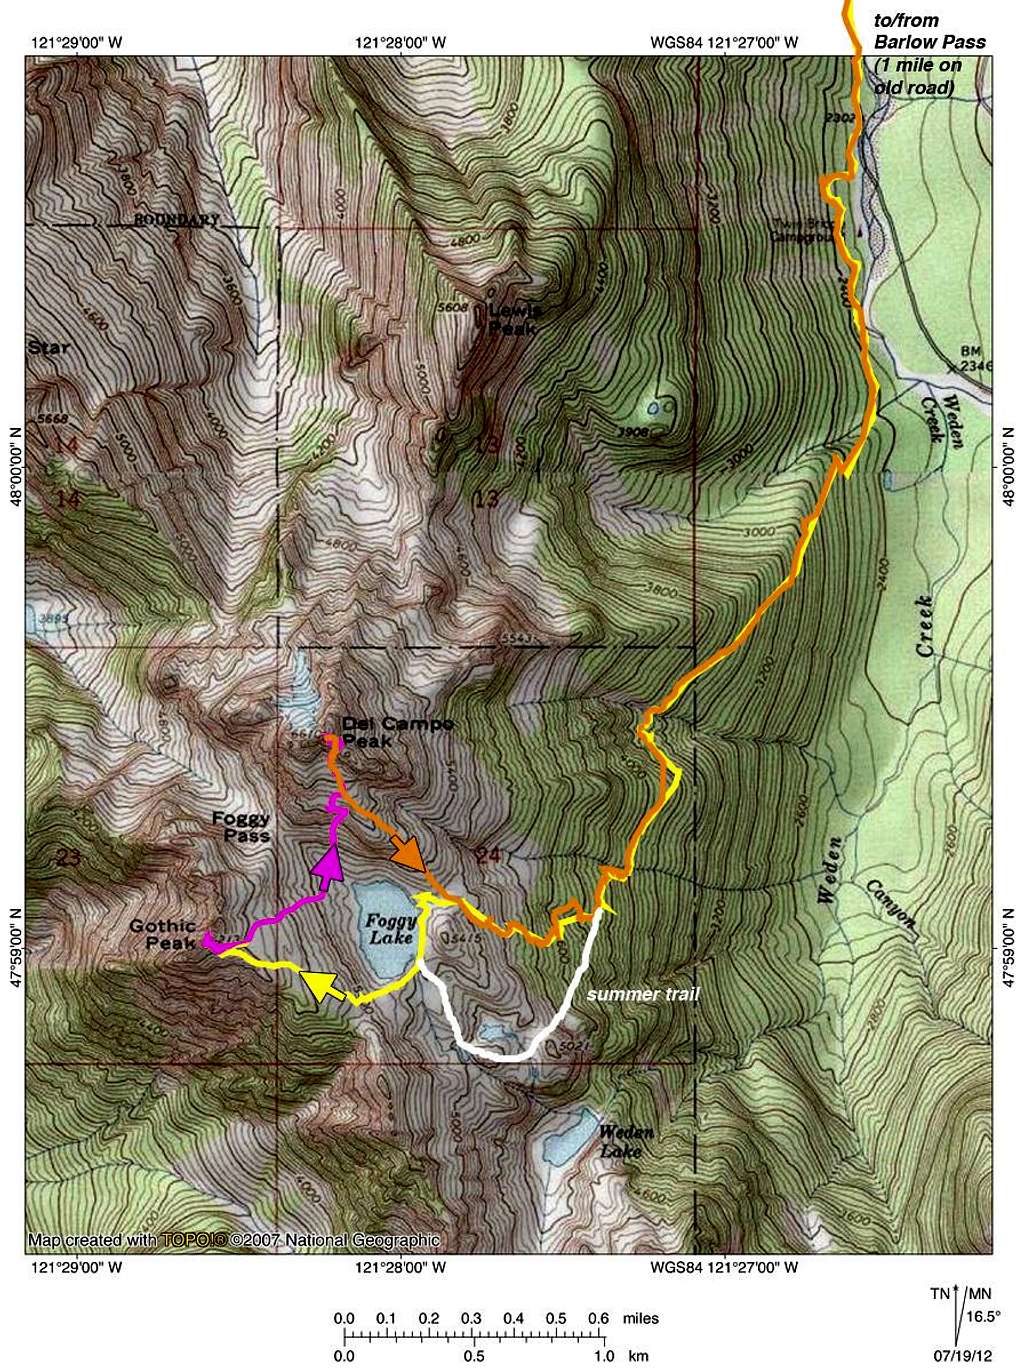 Topo of route up Gothic and Del Campo